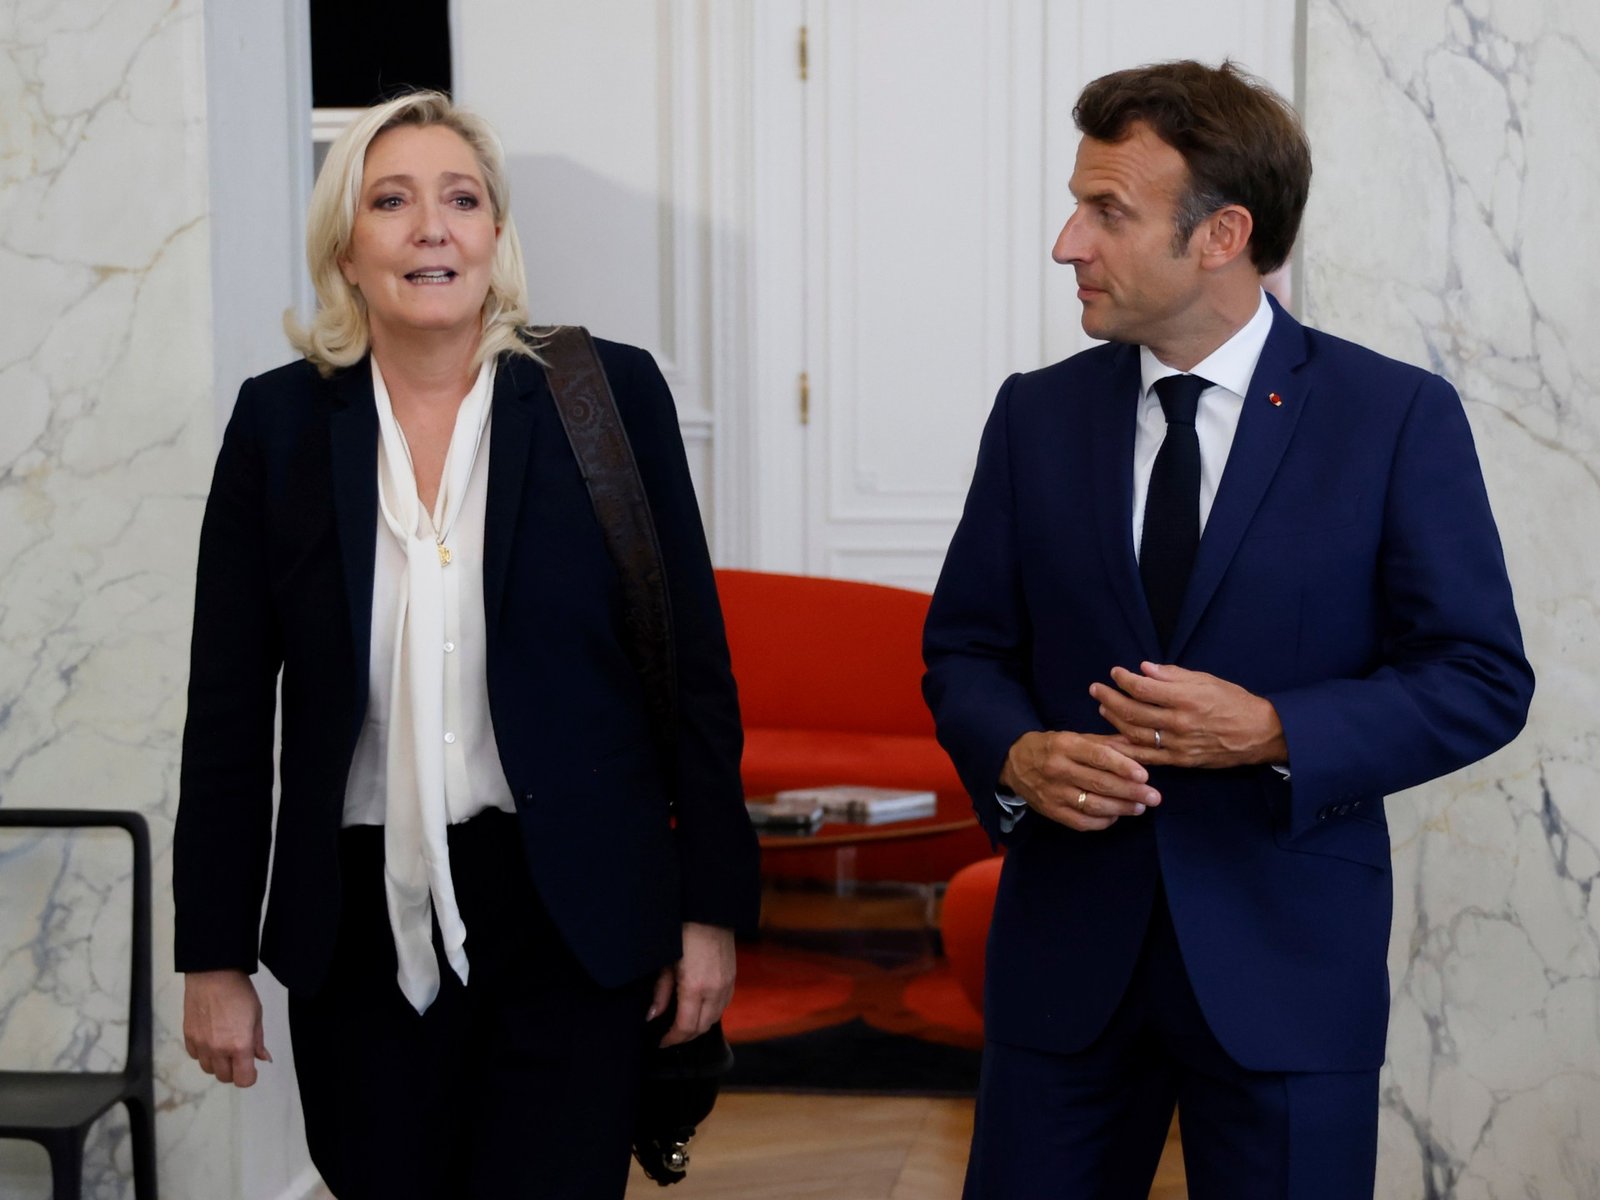 France’s far-right leader Le Pen questions Macron’s role as army chief | Politics News